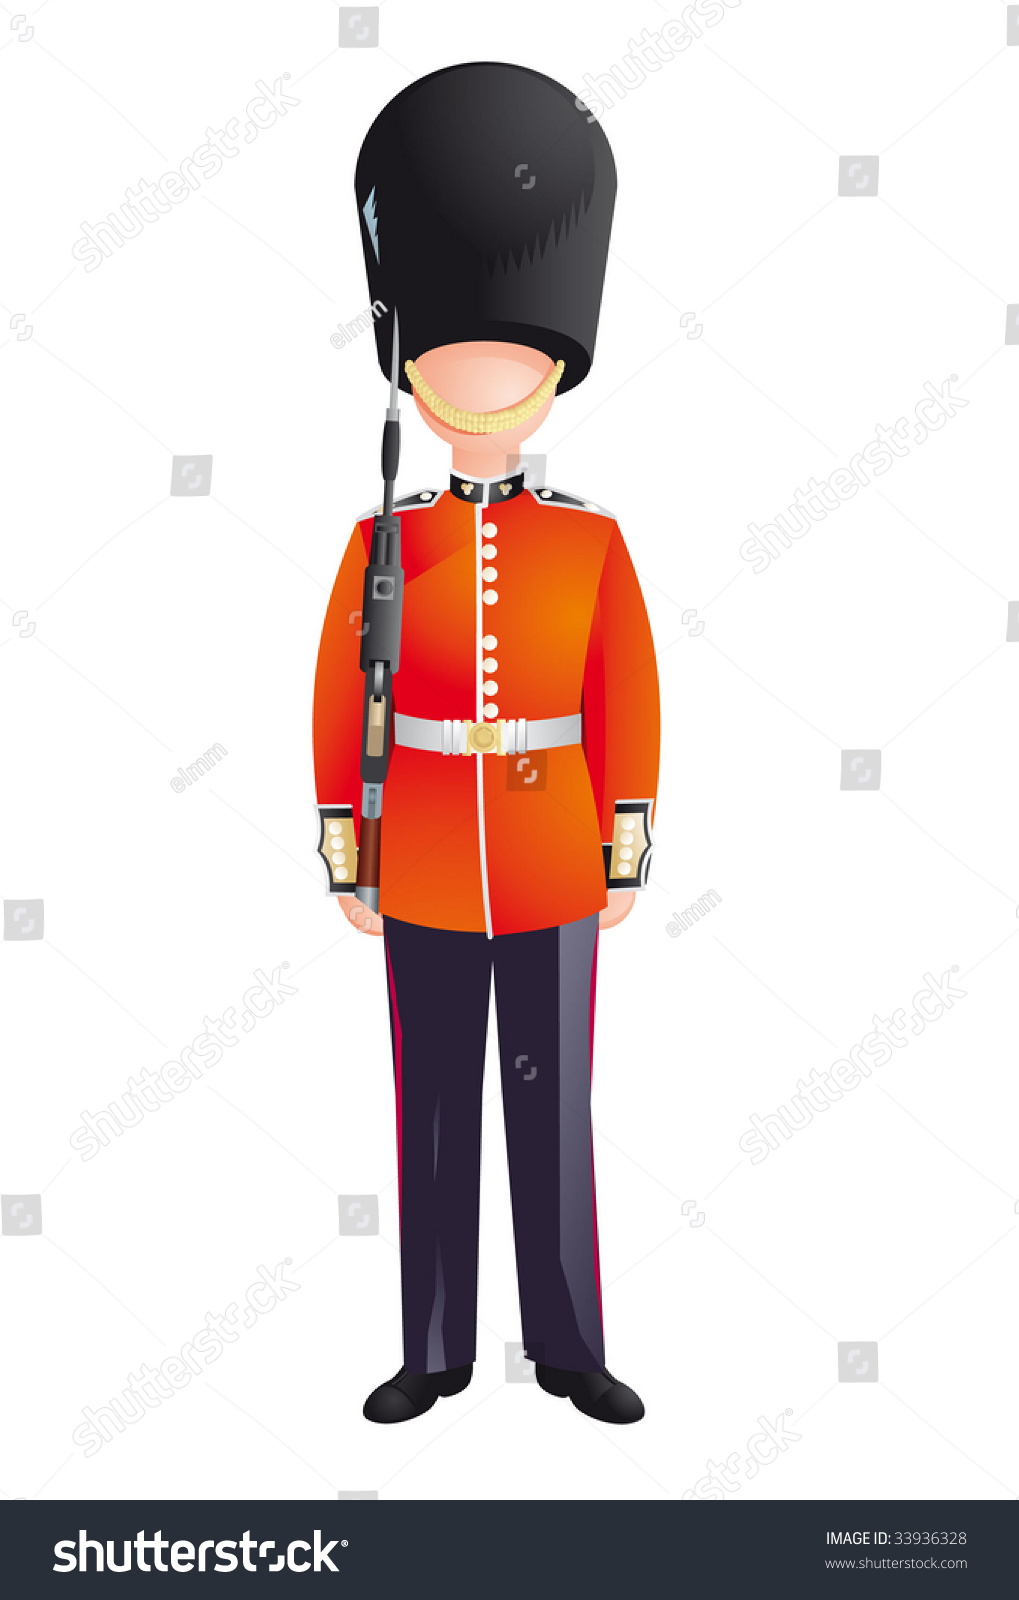 SVG of Queen's Guard, British Army soldiers, London, Buckingham Palace svg